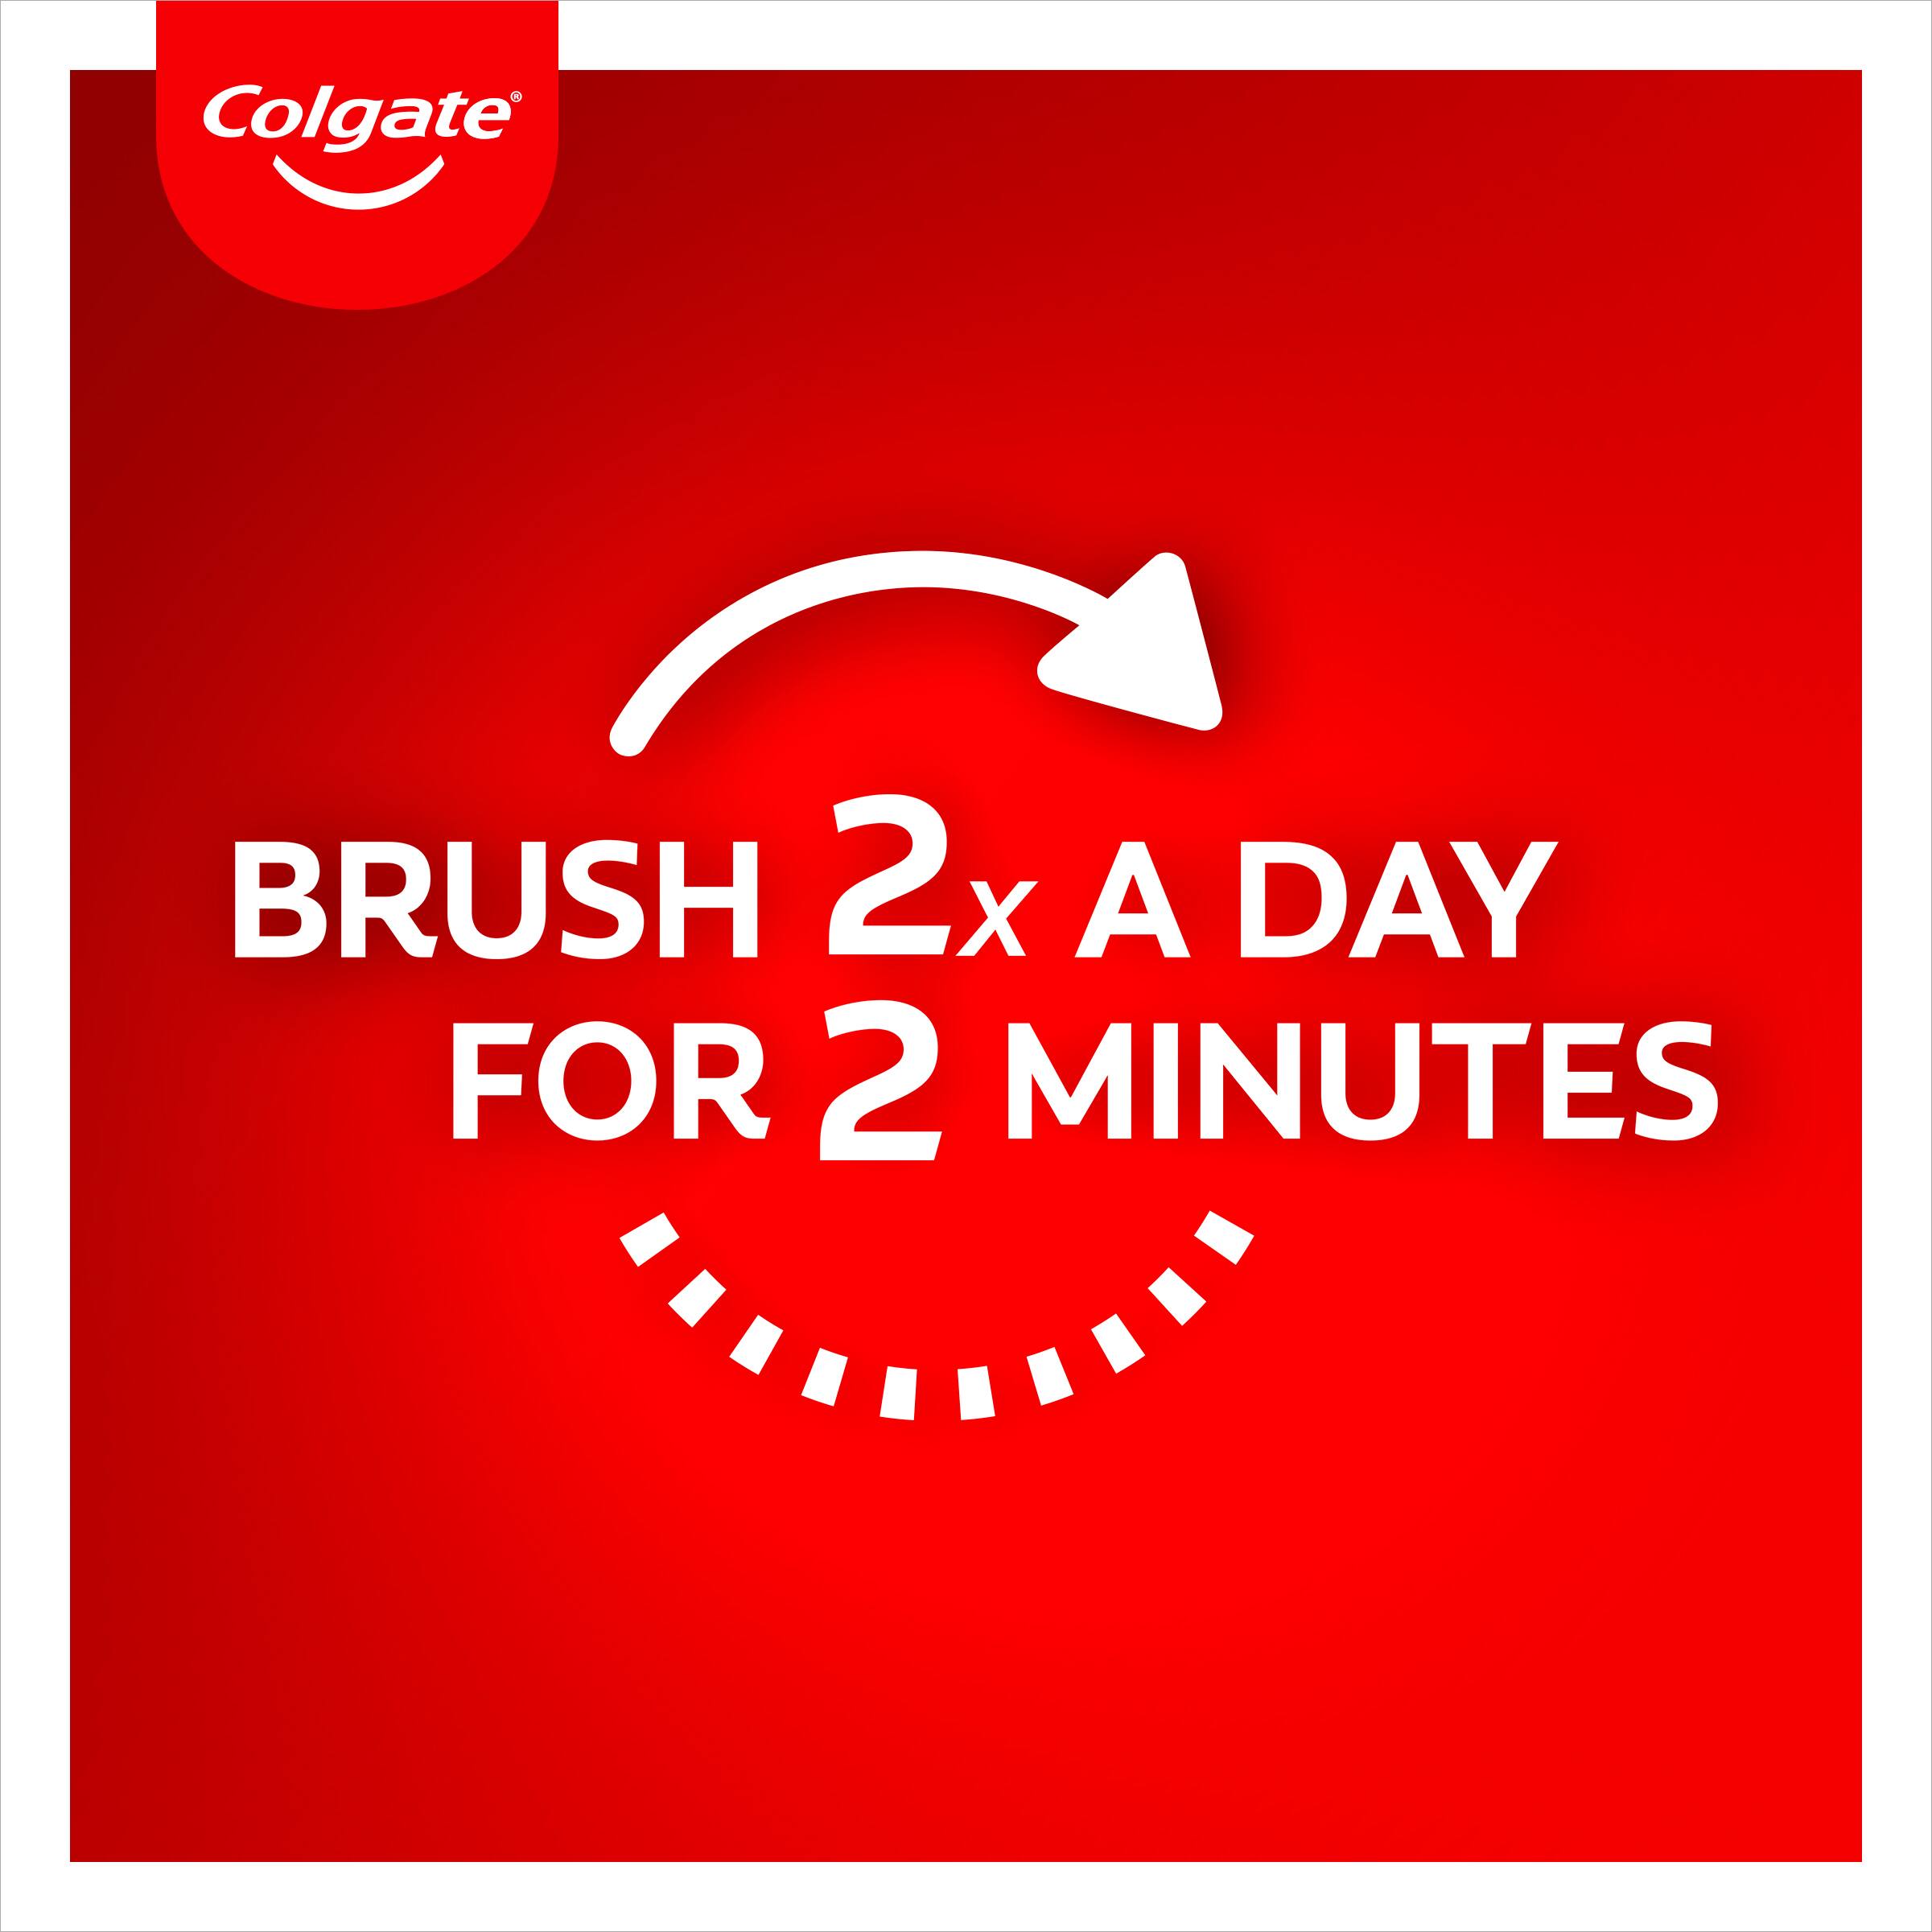 brush 2x a day for 2 minutes